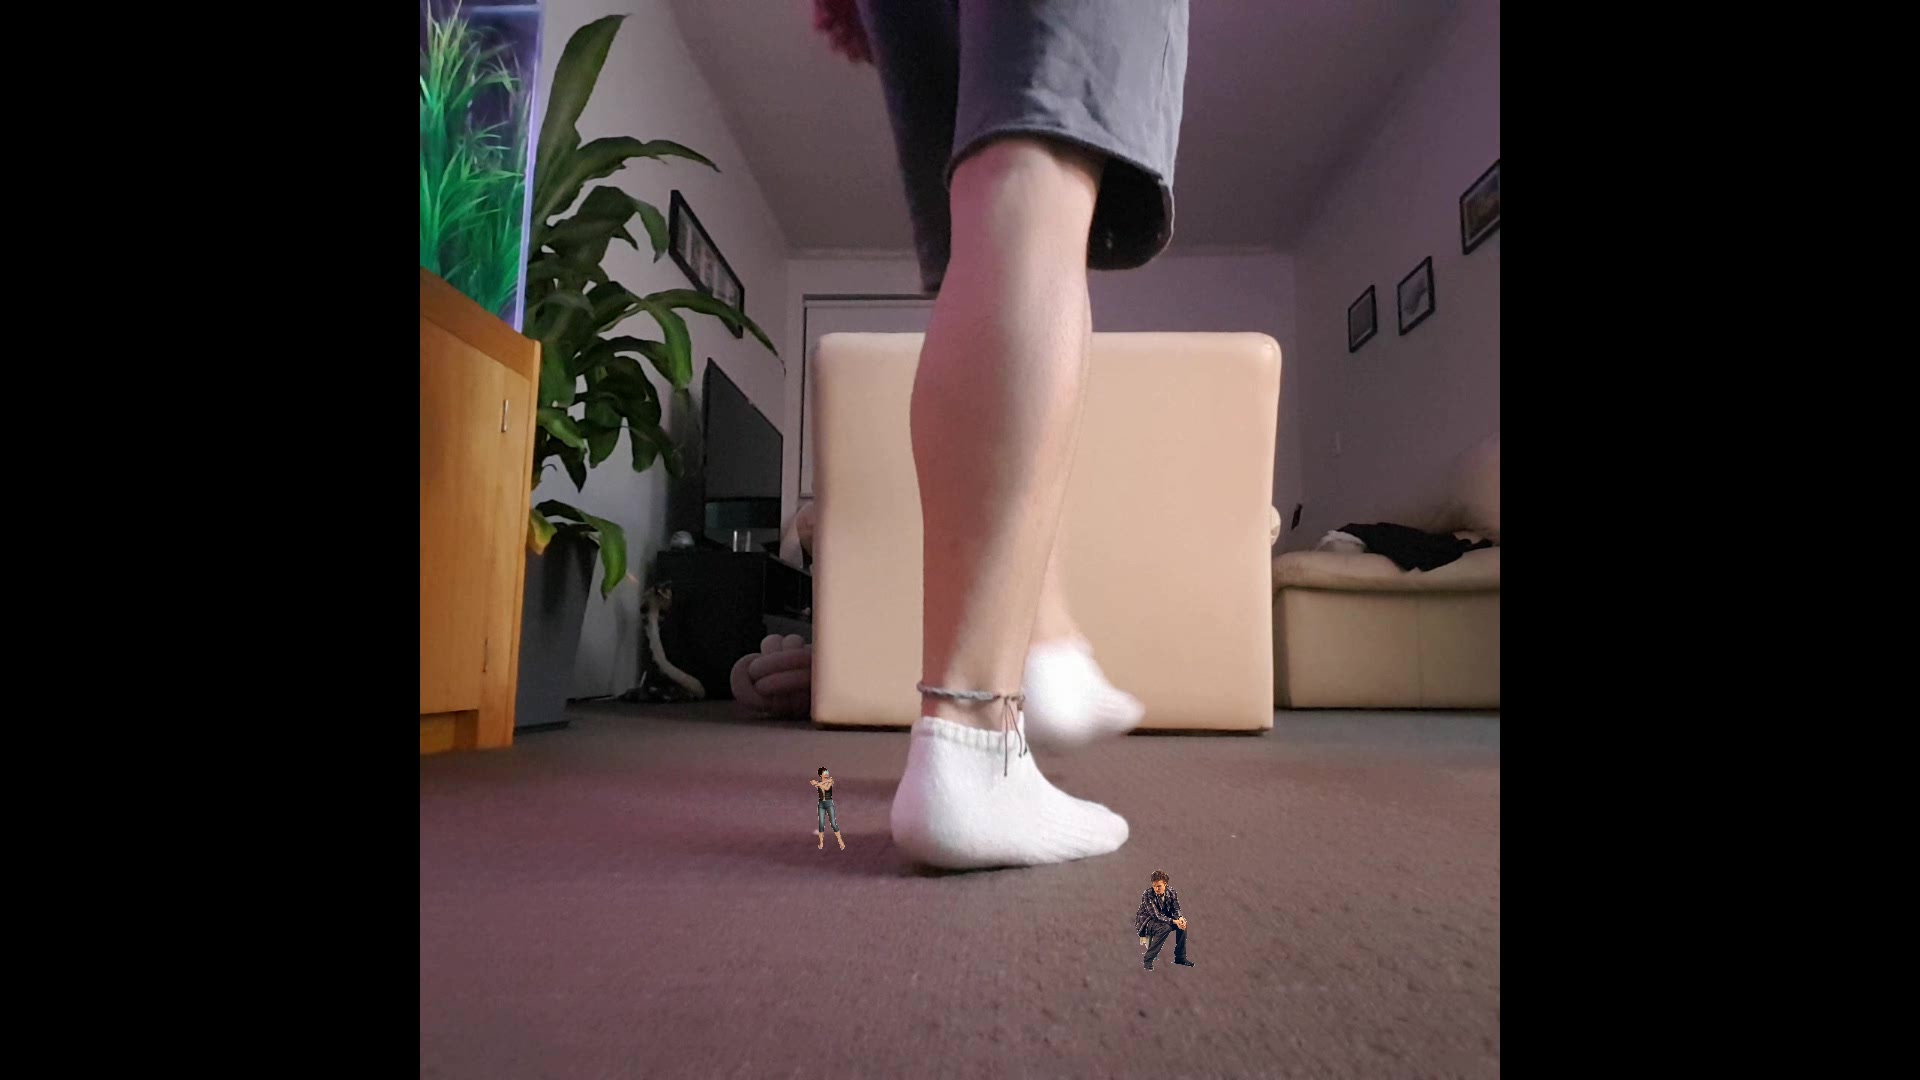 giant boy crushes tiny people with white ankle socks